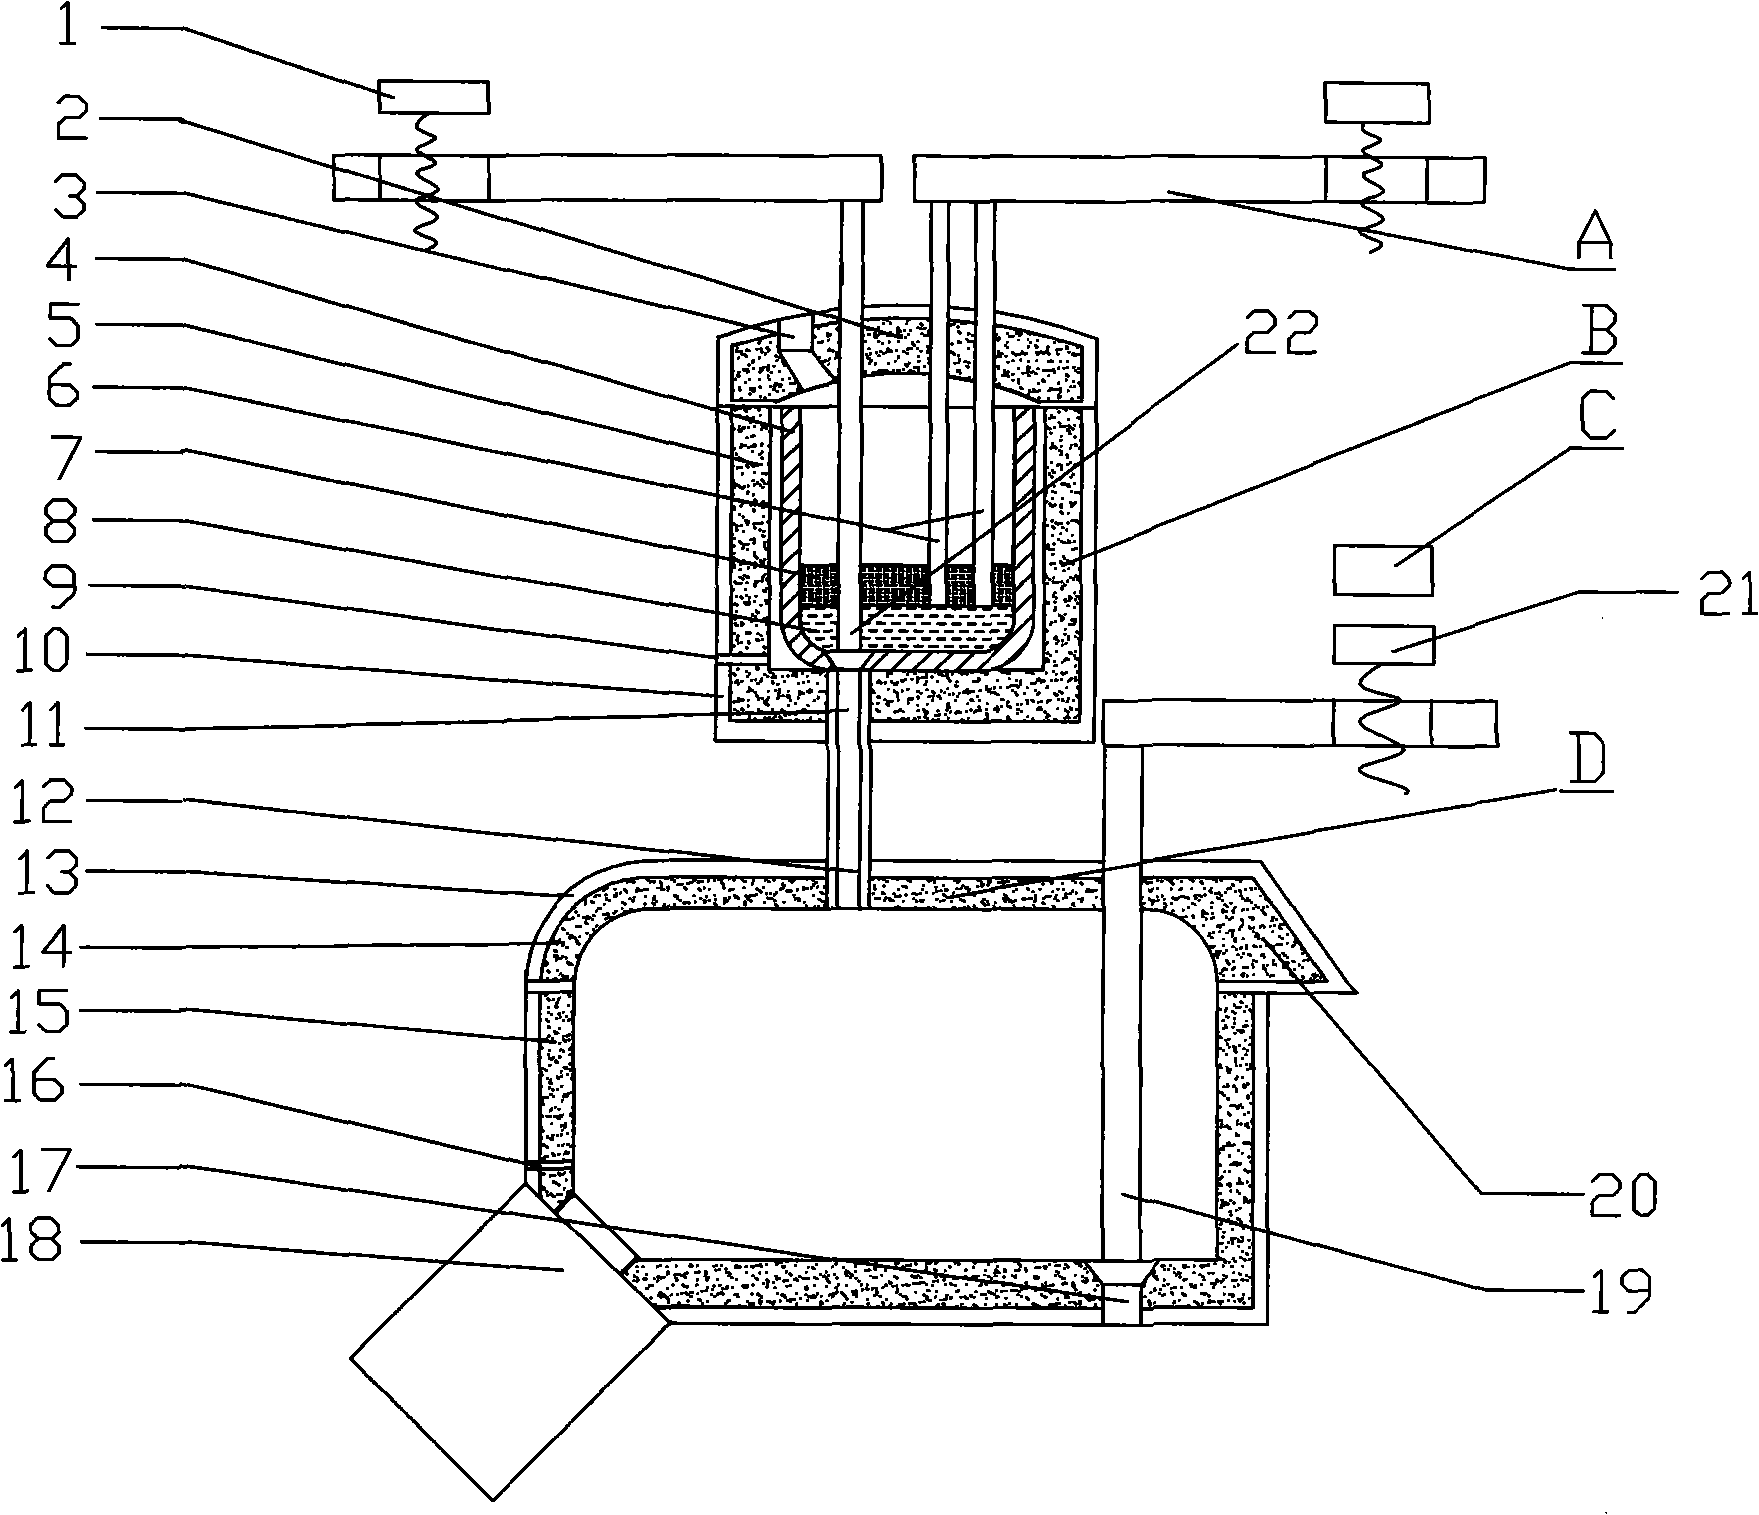 Energy saving two-stage electroslag refining system capable of outputting molten metal